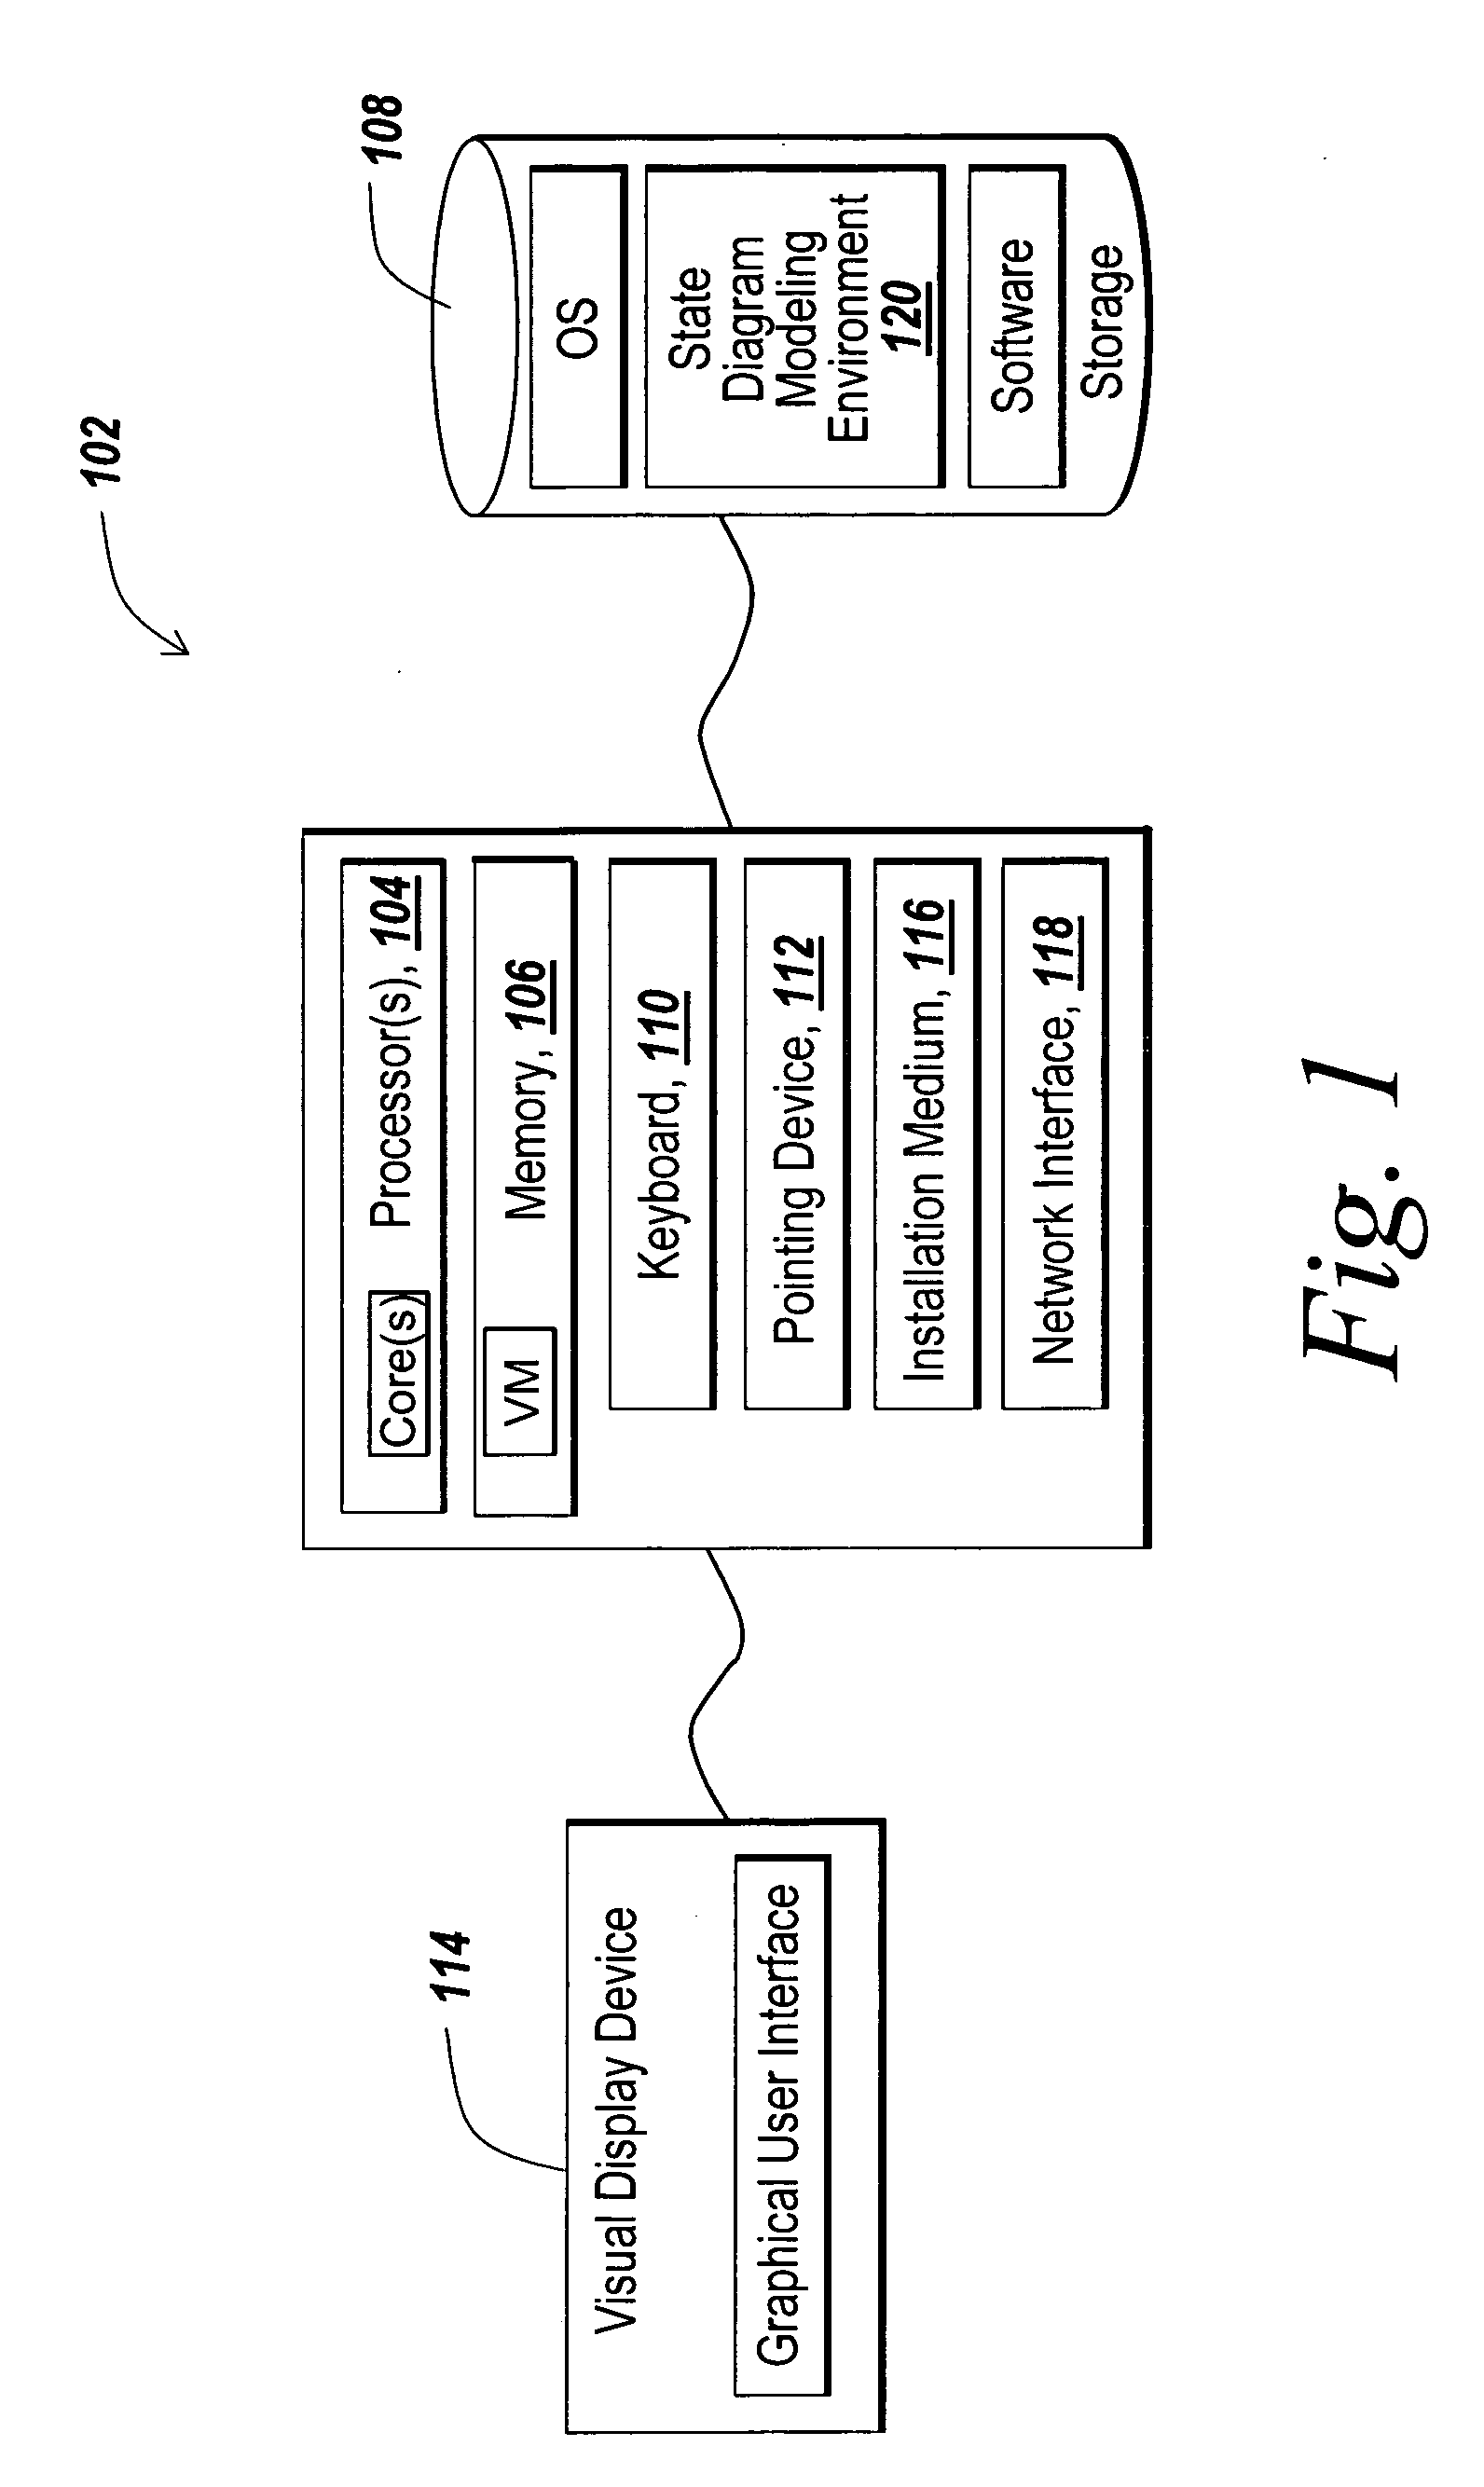 Hardware description language code generation from a state diagram